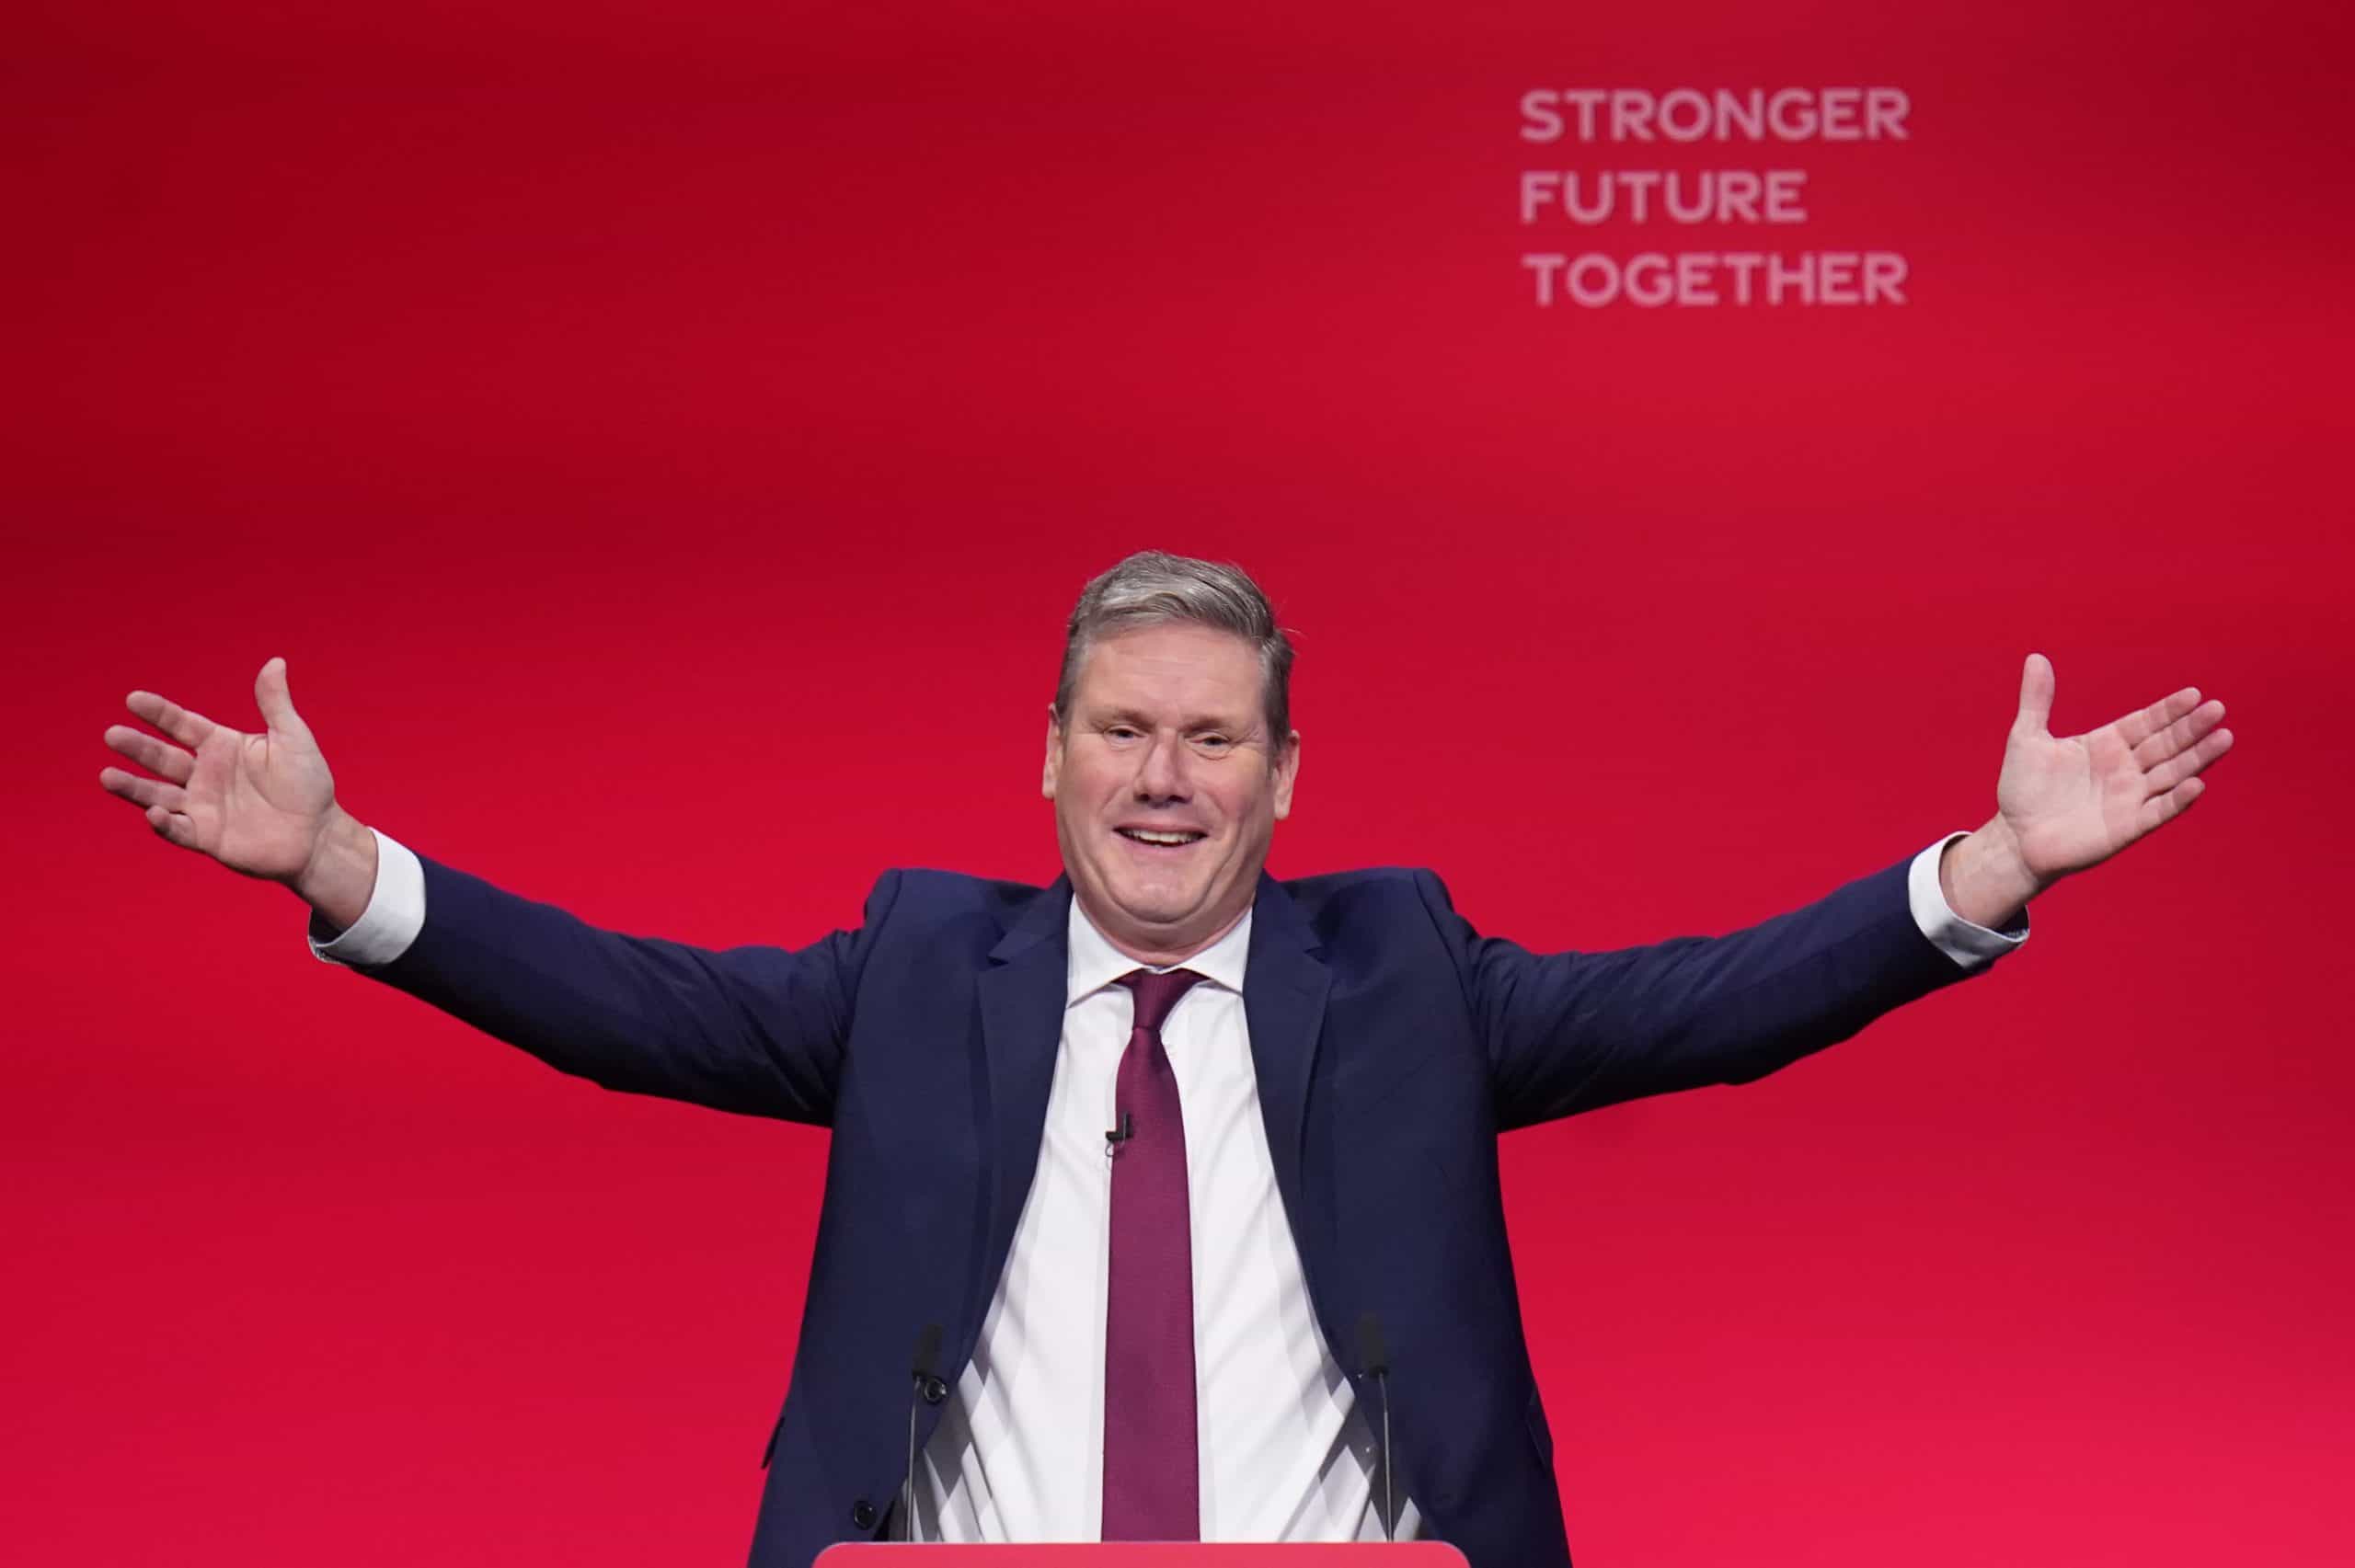 Starmer shrugs off hecklers, takes on ‘trivial’ Tories in conference speech